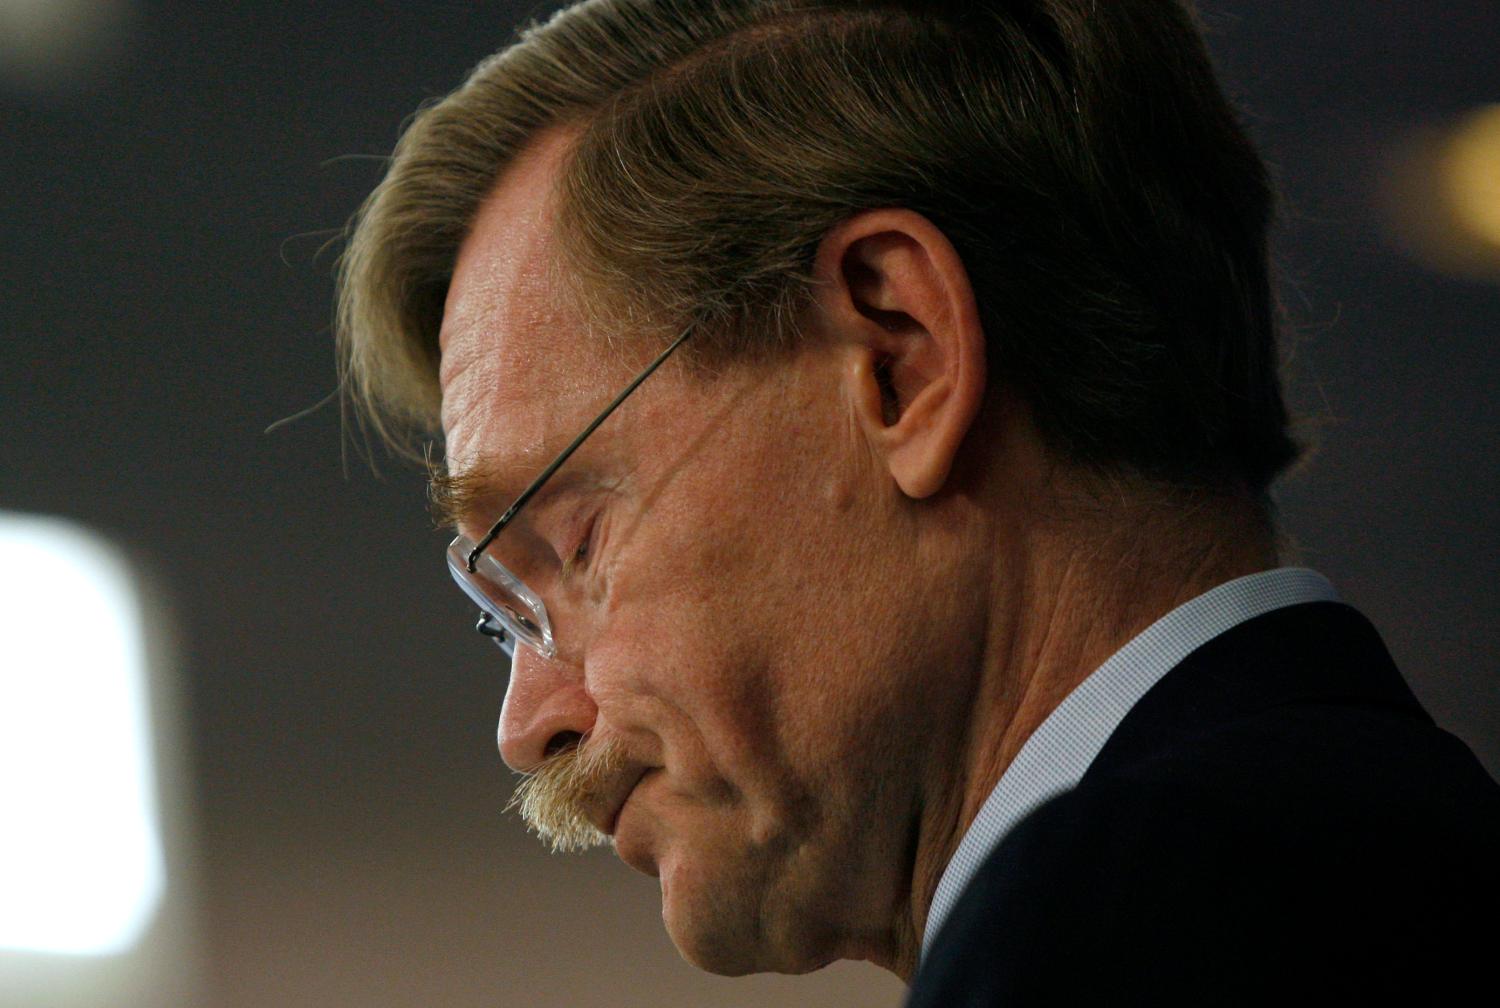 World Bank Group President Robert Zoellick pauses during a speech about the political and economic impact of the global economic crisis, and its implications for development and globalization, in Washington September 28, 2009. Zoellick sounded a cautionary note about granting greater regulatory power to the U.S. Federal Reserve and said the Dollar's future will "depend heavily on U.S. choices," during a speech on Monday.